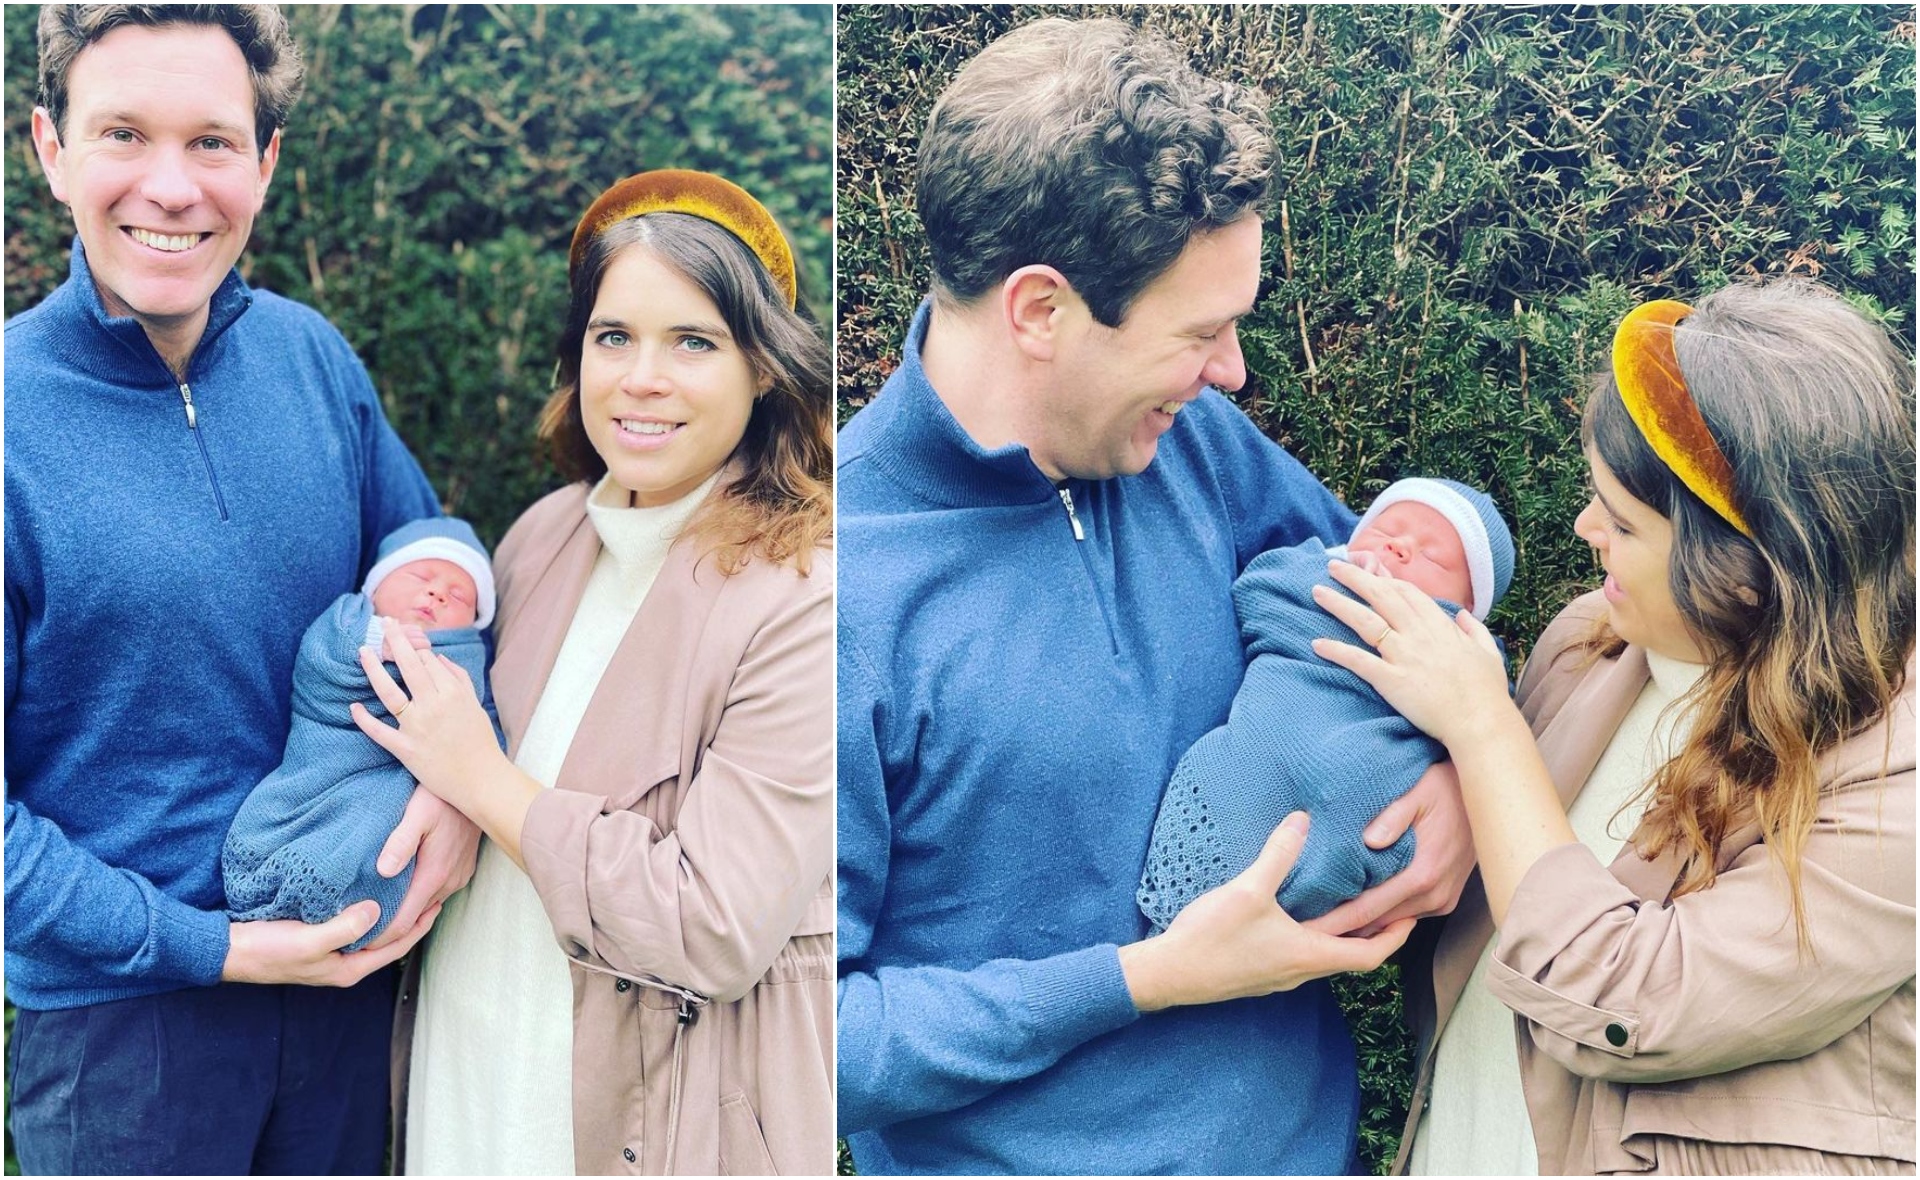 There’s a heartbreaking truth behind Princess Eugenie’s first photos with her new son August